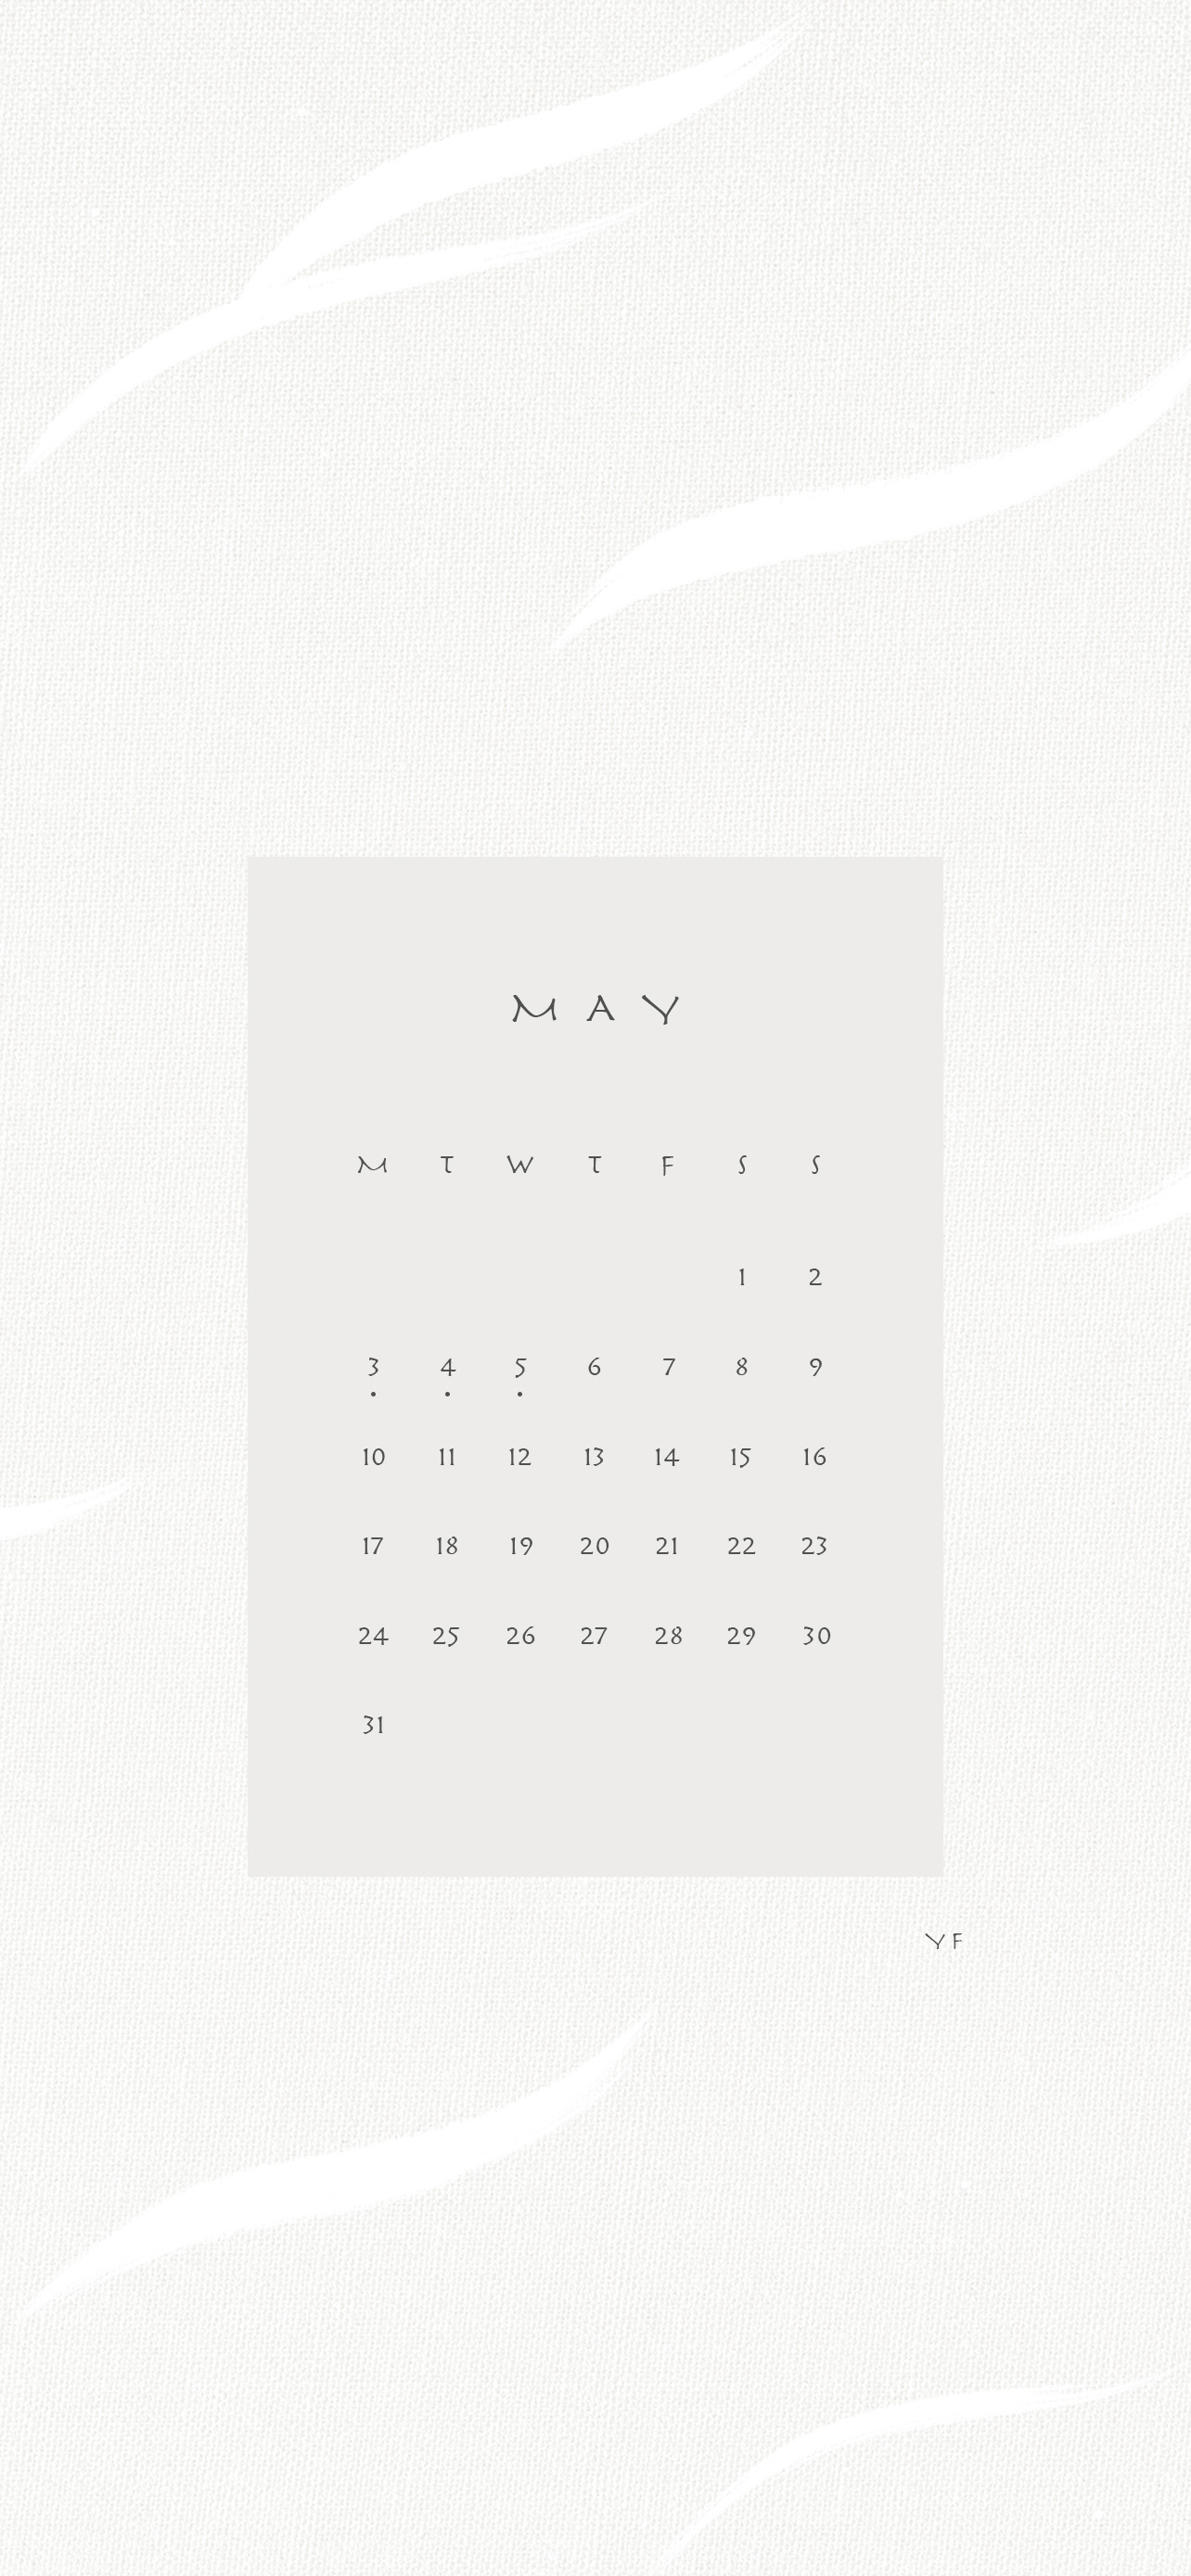 May 21 Calendar Wallpaper For The Iphone Design By Yf